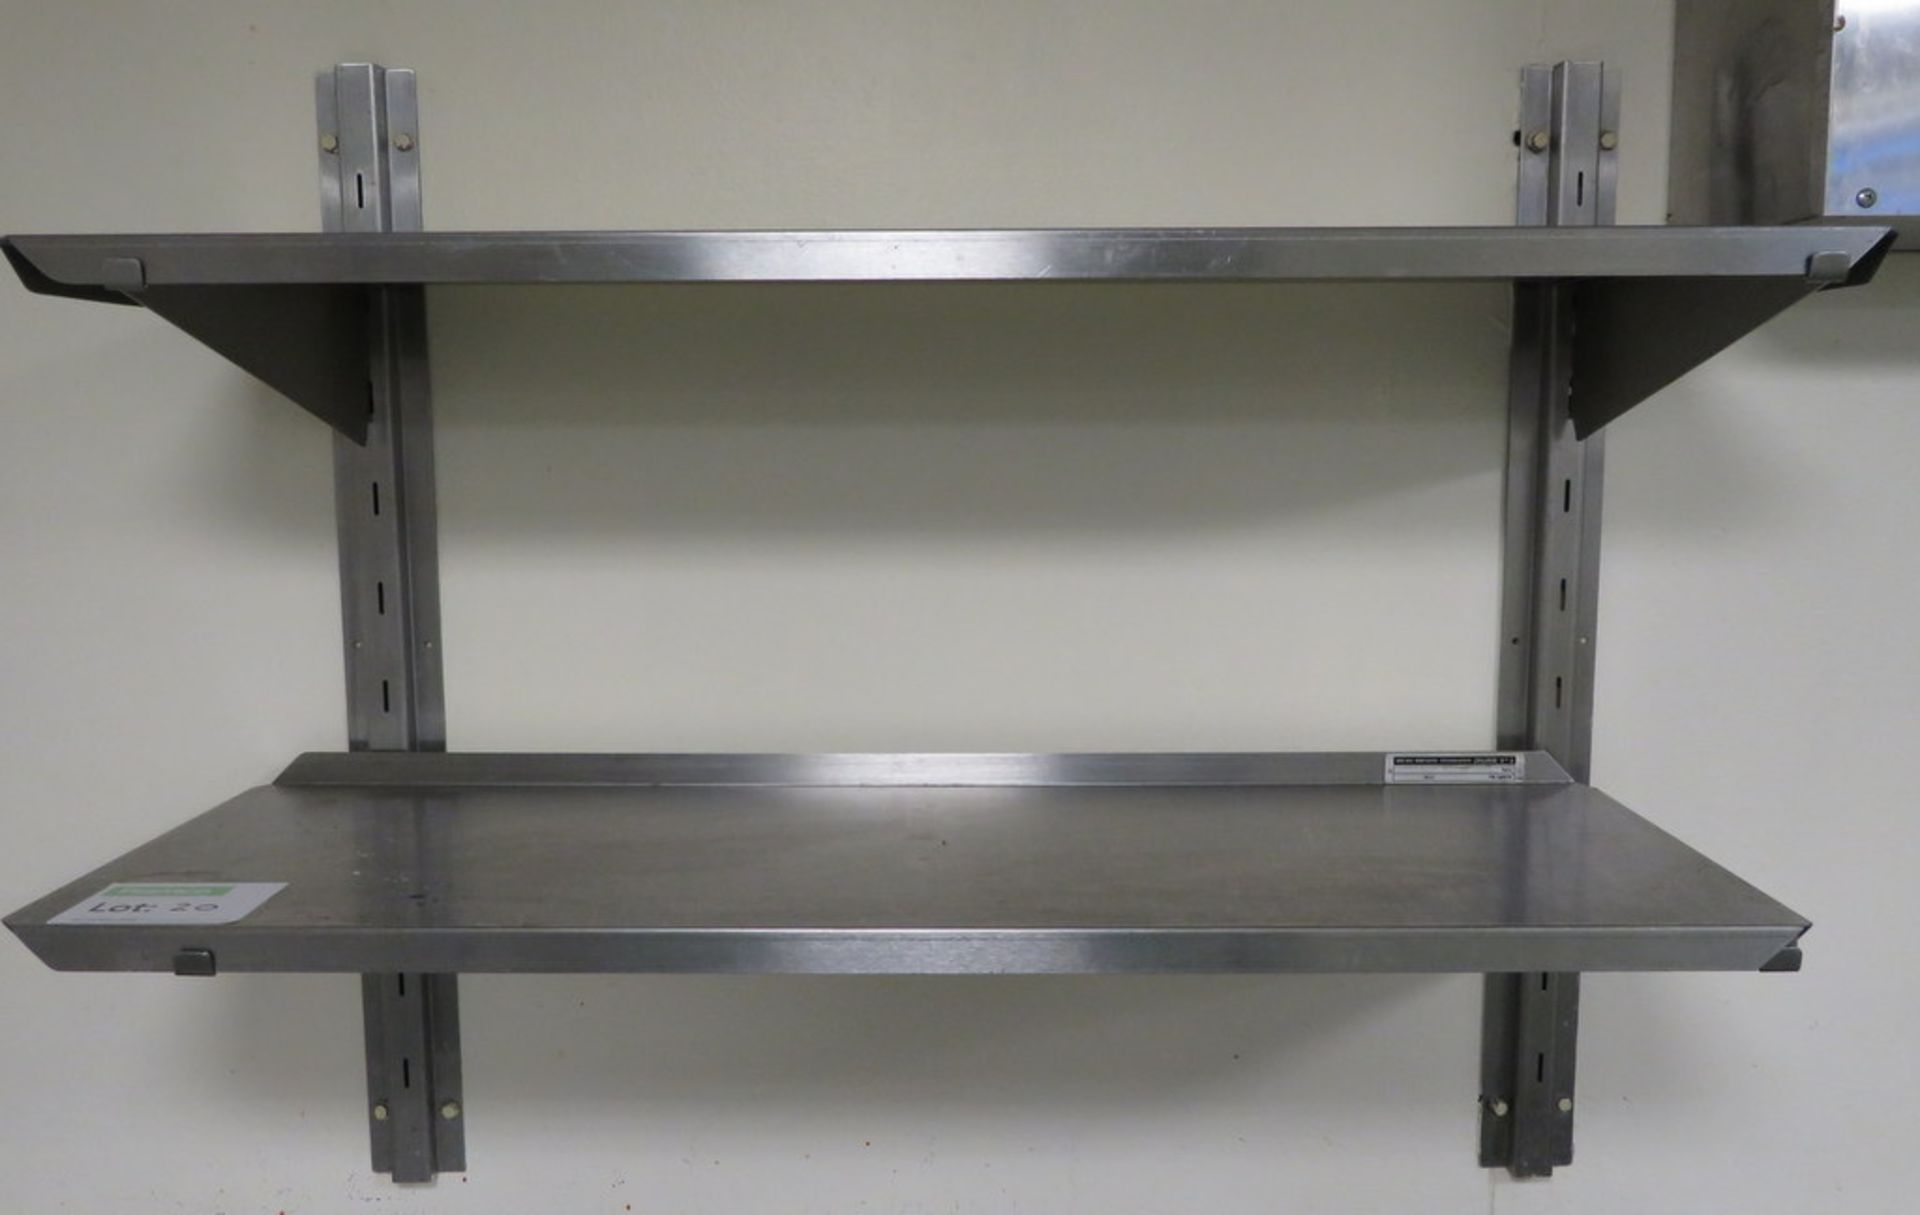 5 X MOFFAT STAINLESS STEEL WALL MOUNTED SHELVES - Image 2 of 4